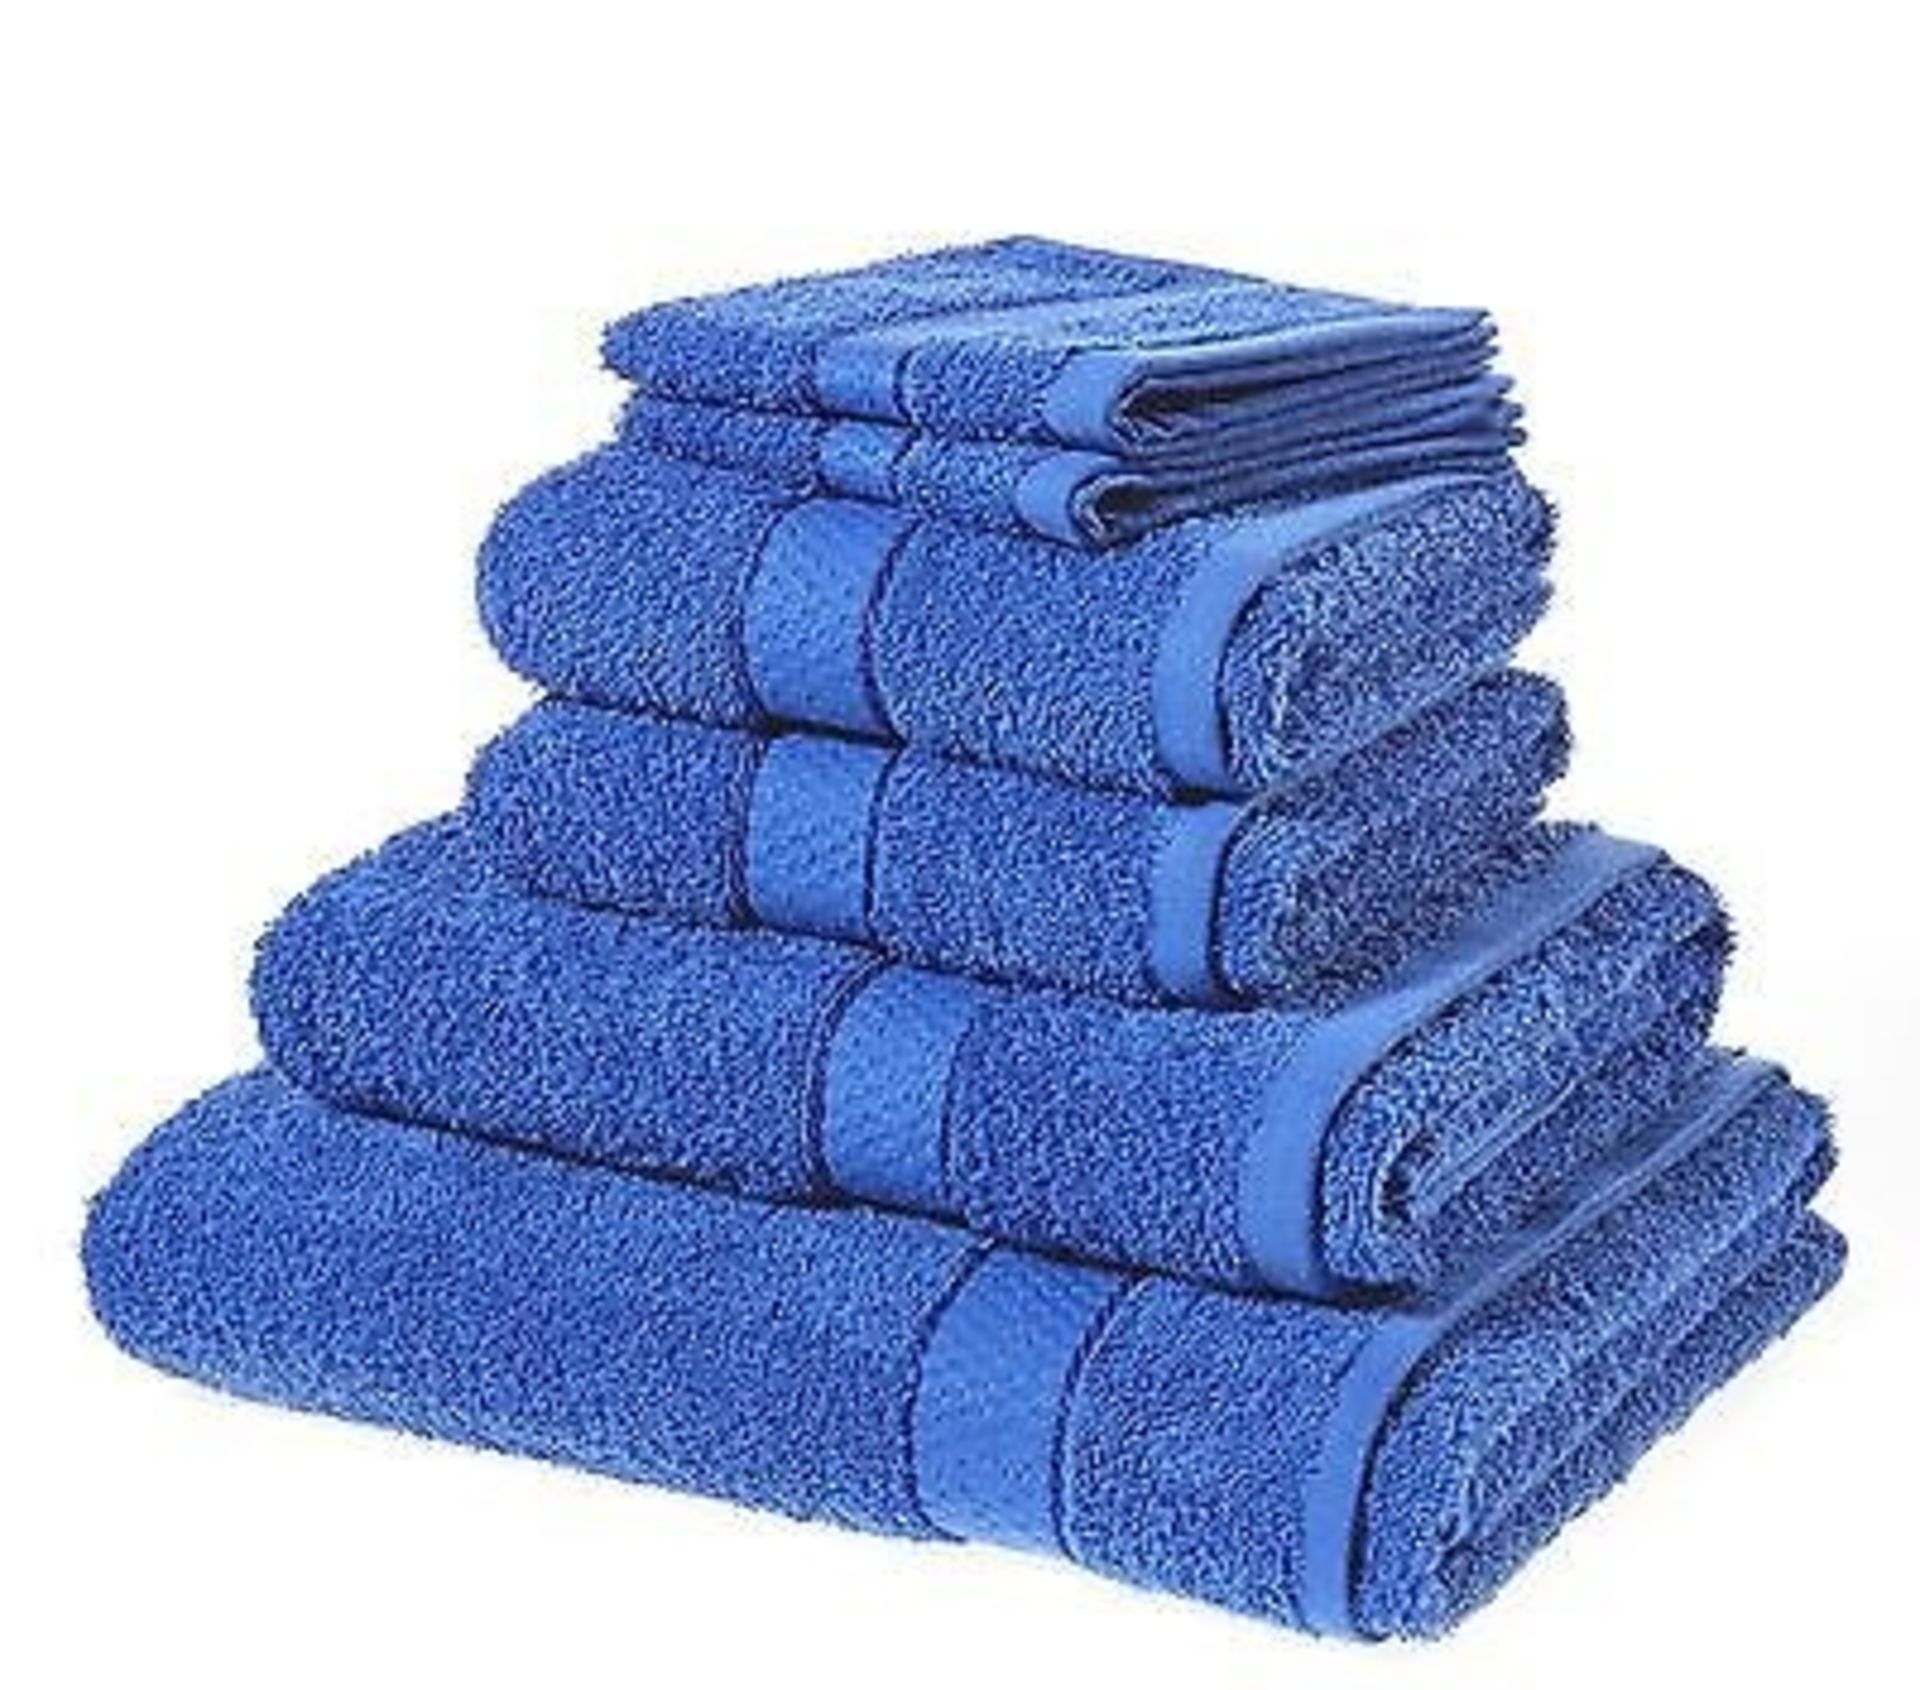 V Brand New Royal Blue 6 Piece Towel Bale Set With 2 Face Towels - 2 Hand Towels - 1 Bath Sheet -